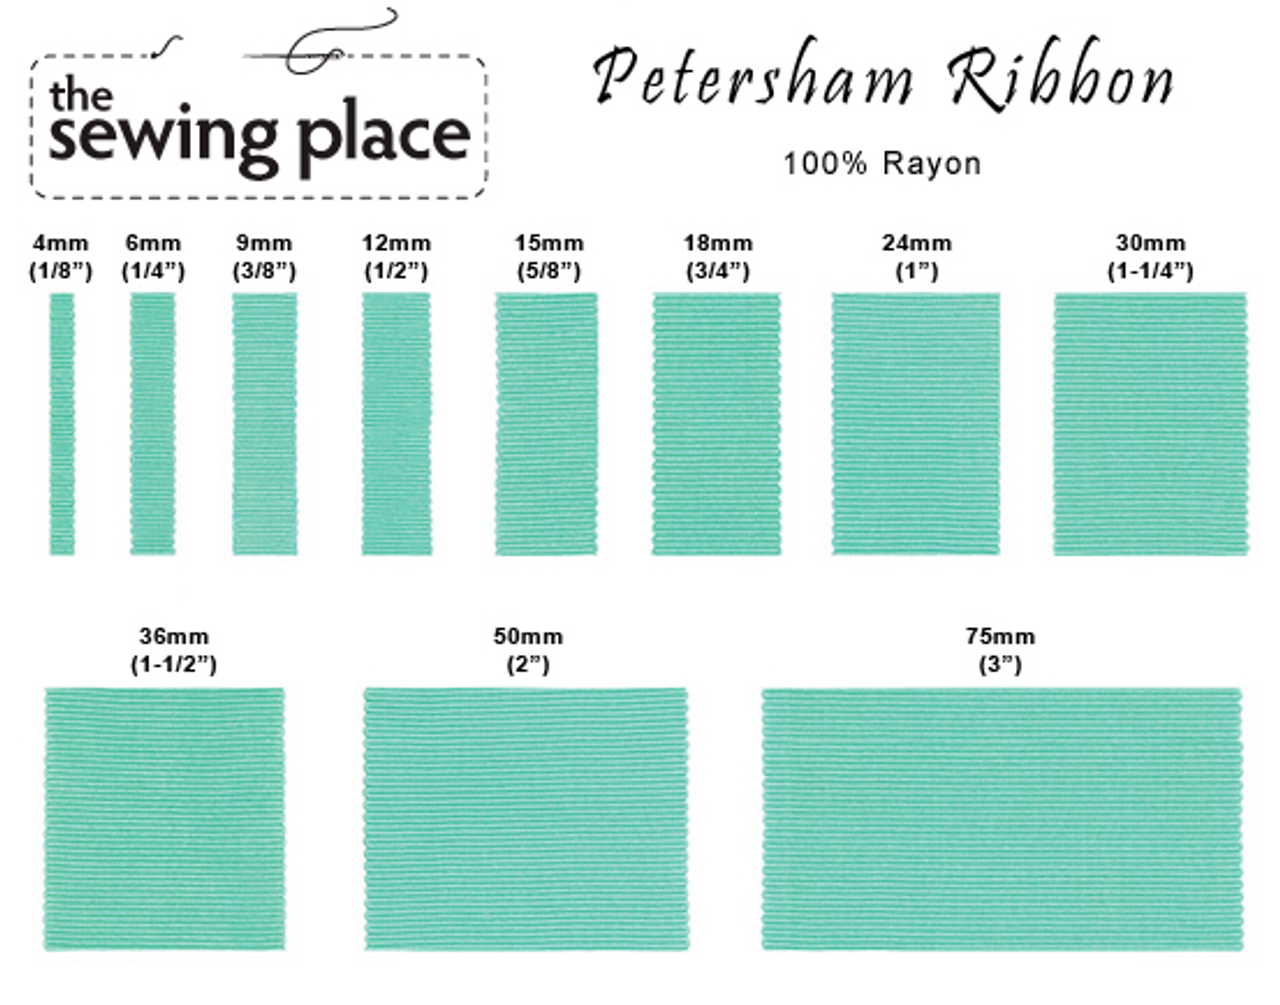 History Of Grosgrain Ribbon And The Difference Between It And Petersham